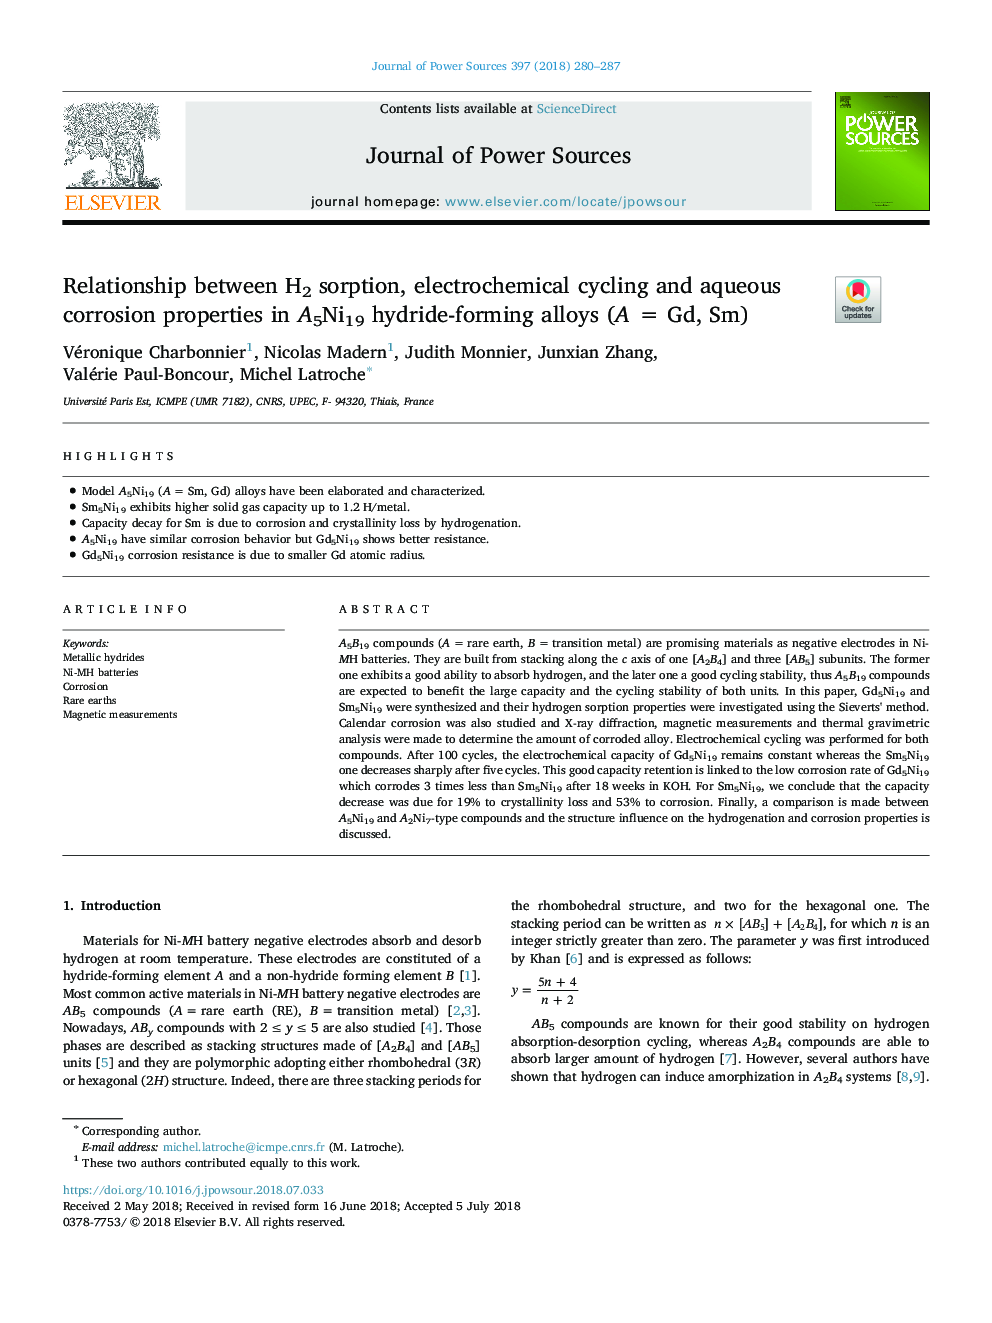 Relationship between H2 sorption, electrochemical cycling and aqueous corrosion properties in A5Ni19 hydride-forming alloys (A = Gd, Sm)